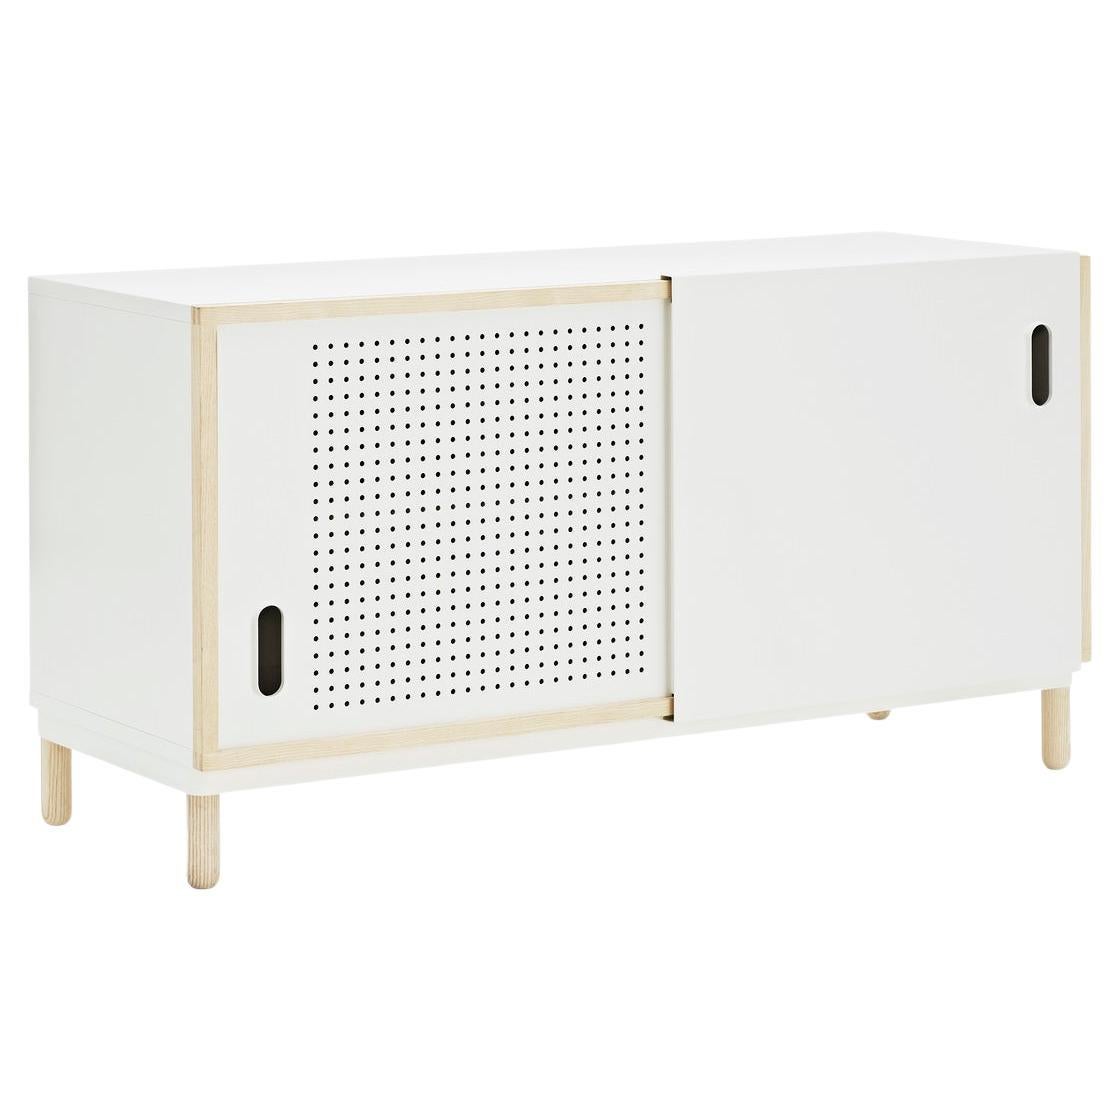 Kabino comes flat packed and is assembled using the included manual and tools. Kabino is made of painted MDF with an ash frame mounted to its front. Fronts are made of matt lacquered aluminum. 2 Kabinos can be stacked on top of each other if the